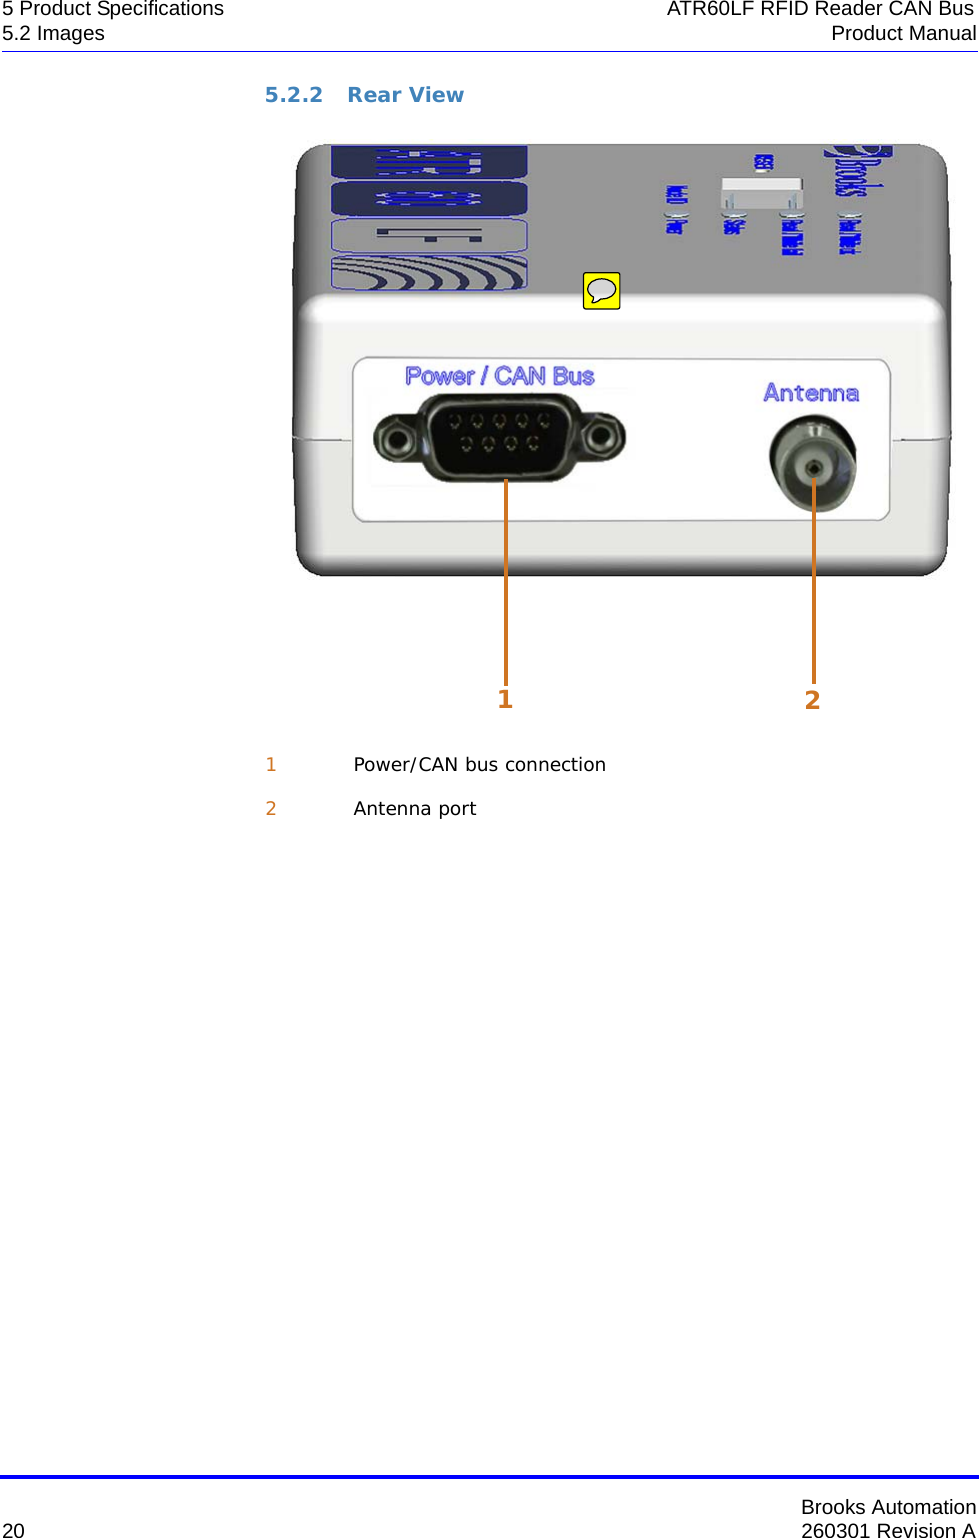 Brooks Automation20 260301 Revision A5 Product Specifications ATR60LF RFID Reader CAN Bus5.2 Images Product Manual5.2.2 Rear View1Power/CAN bus connection2Antenna port21